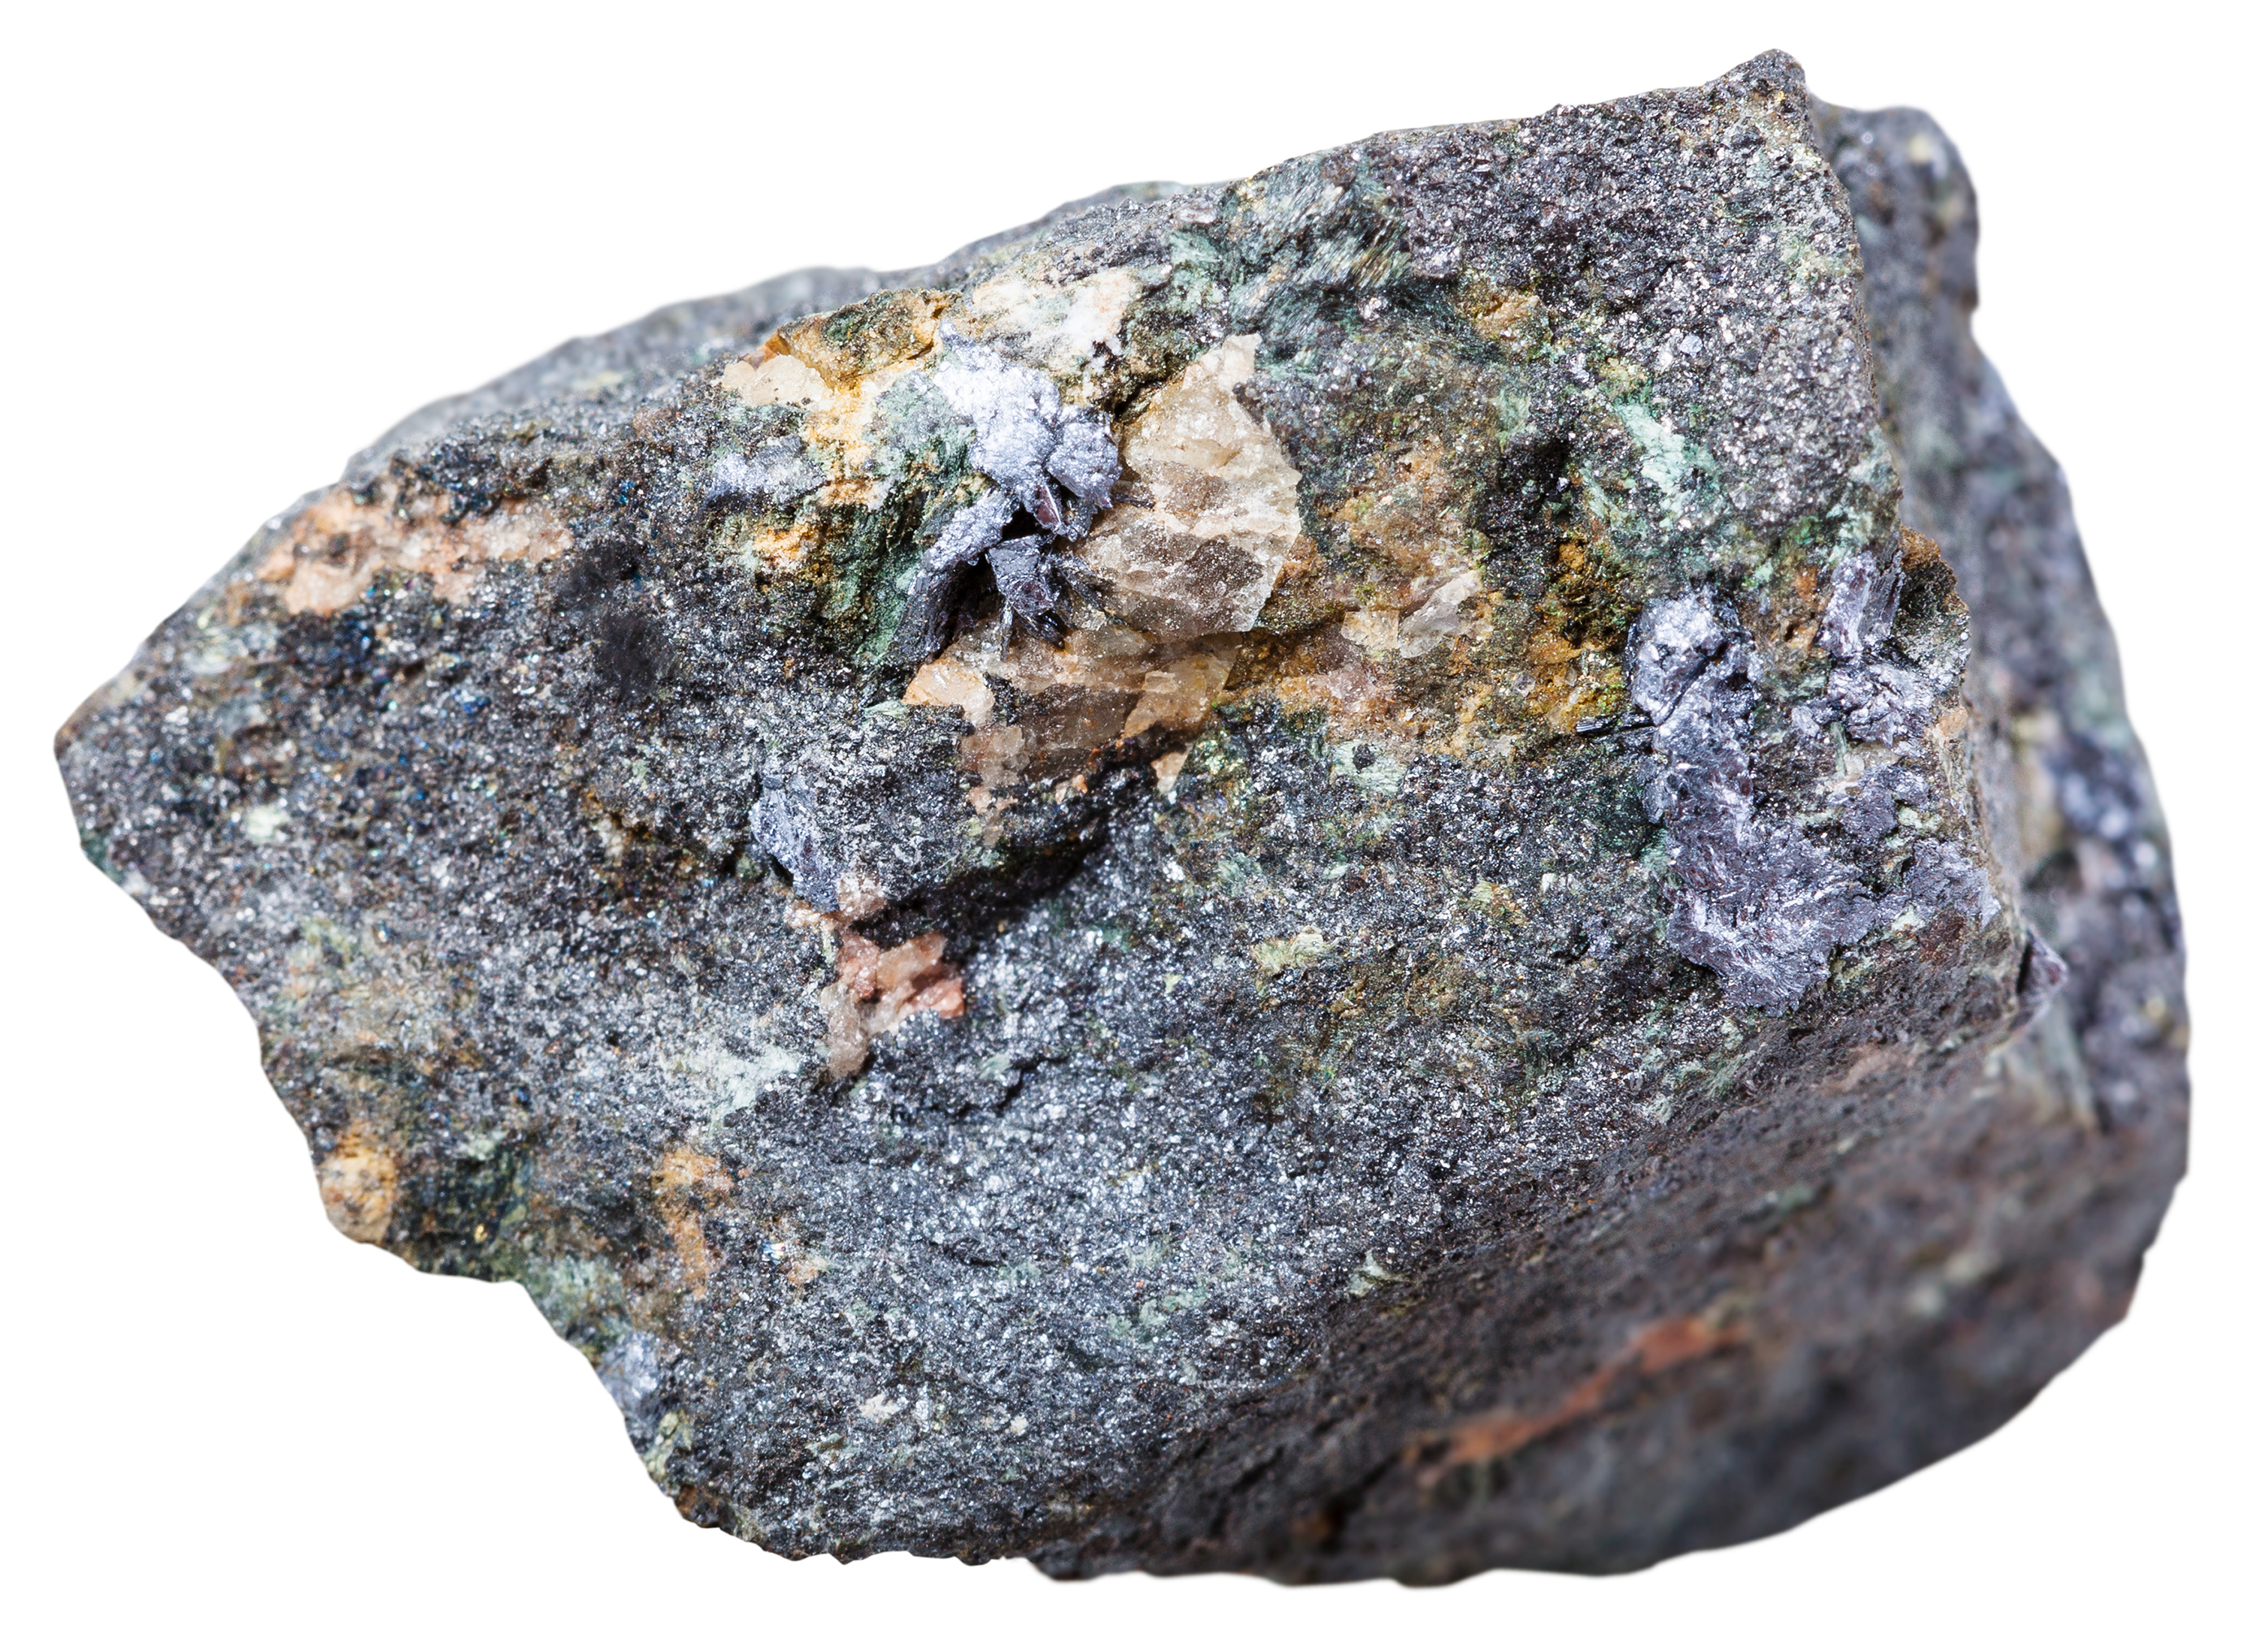 Molybdenum occurs in nature most often in the form of minerals.